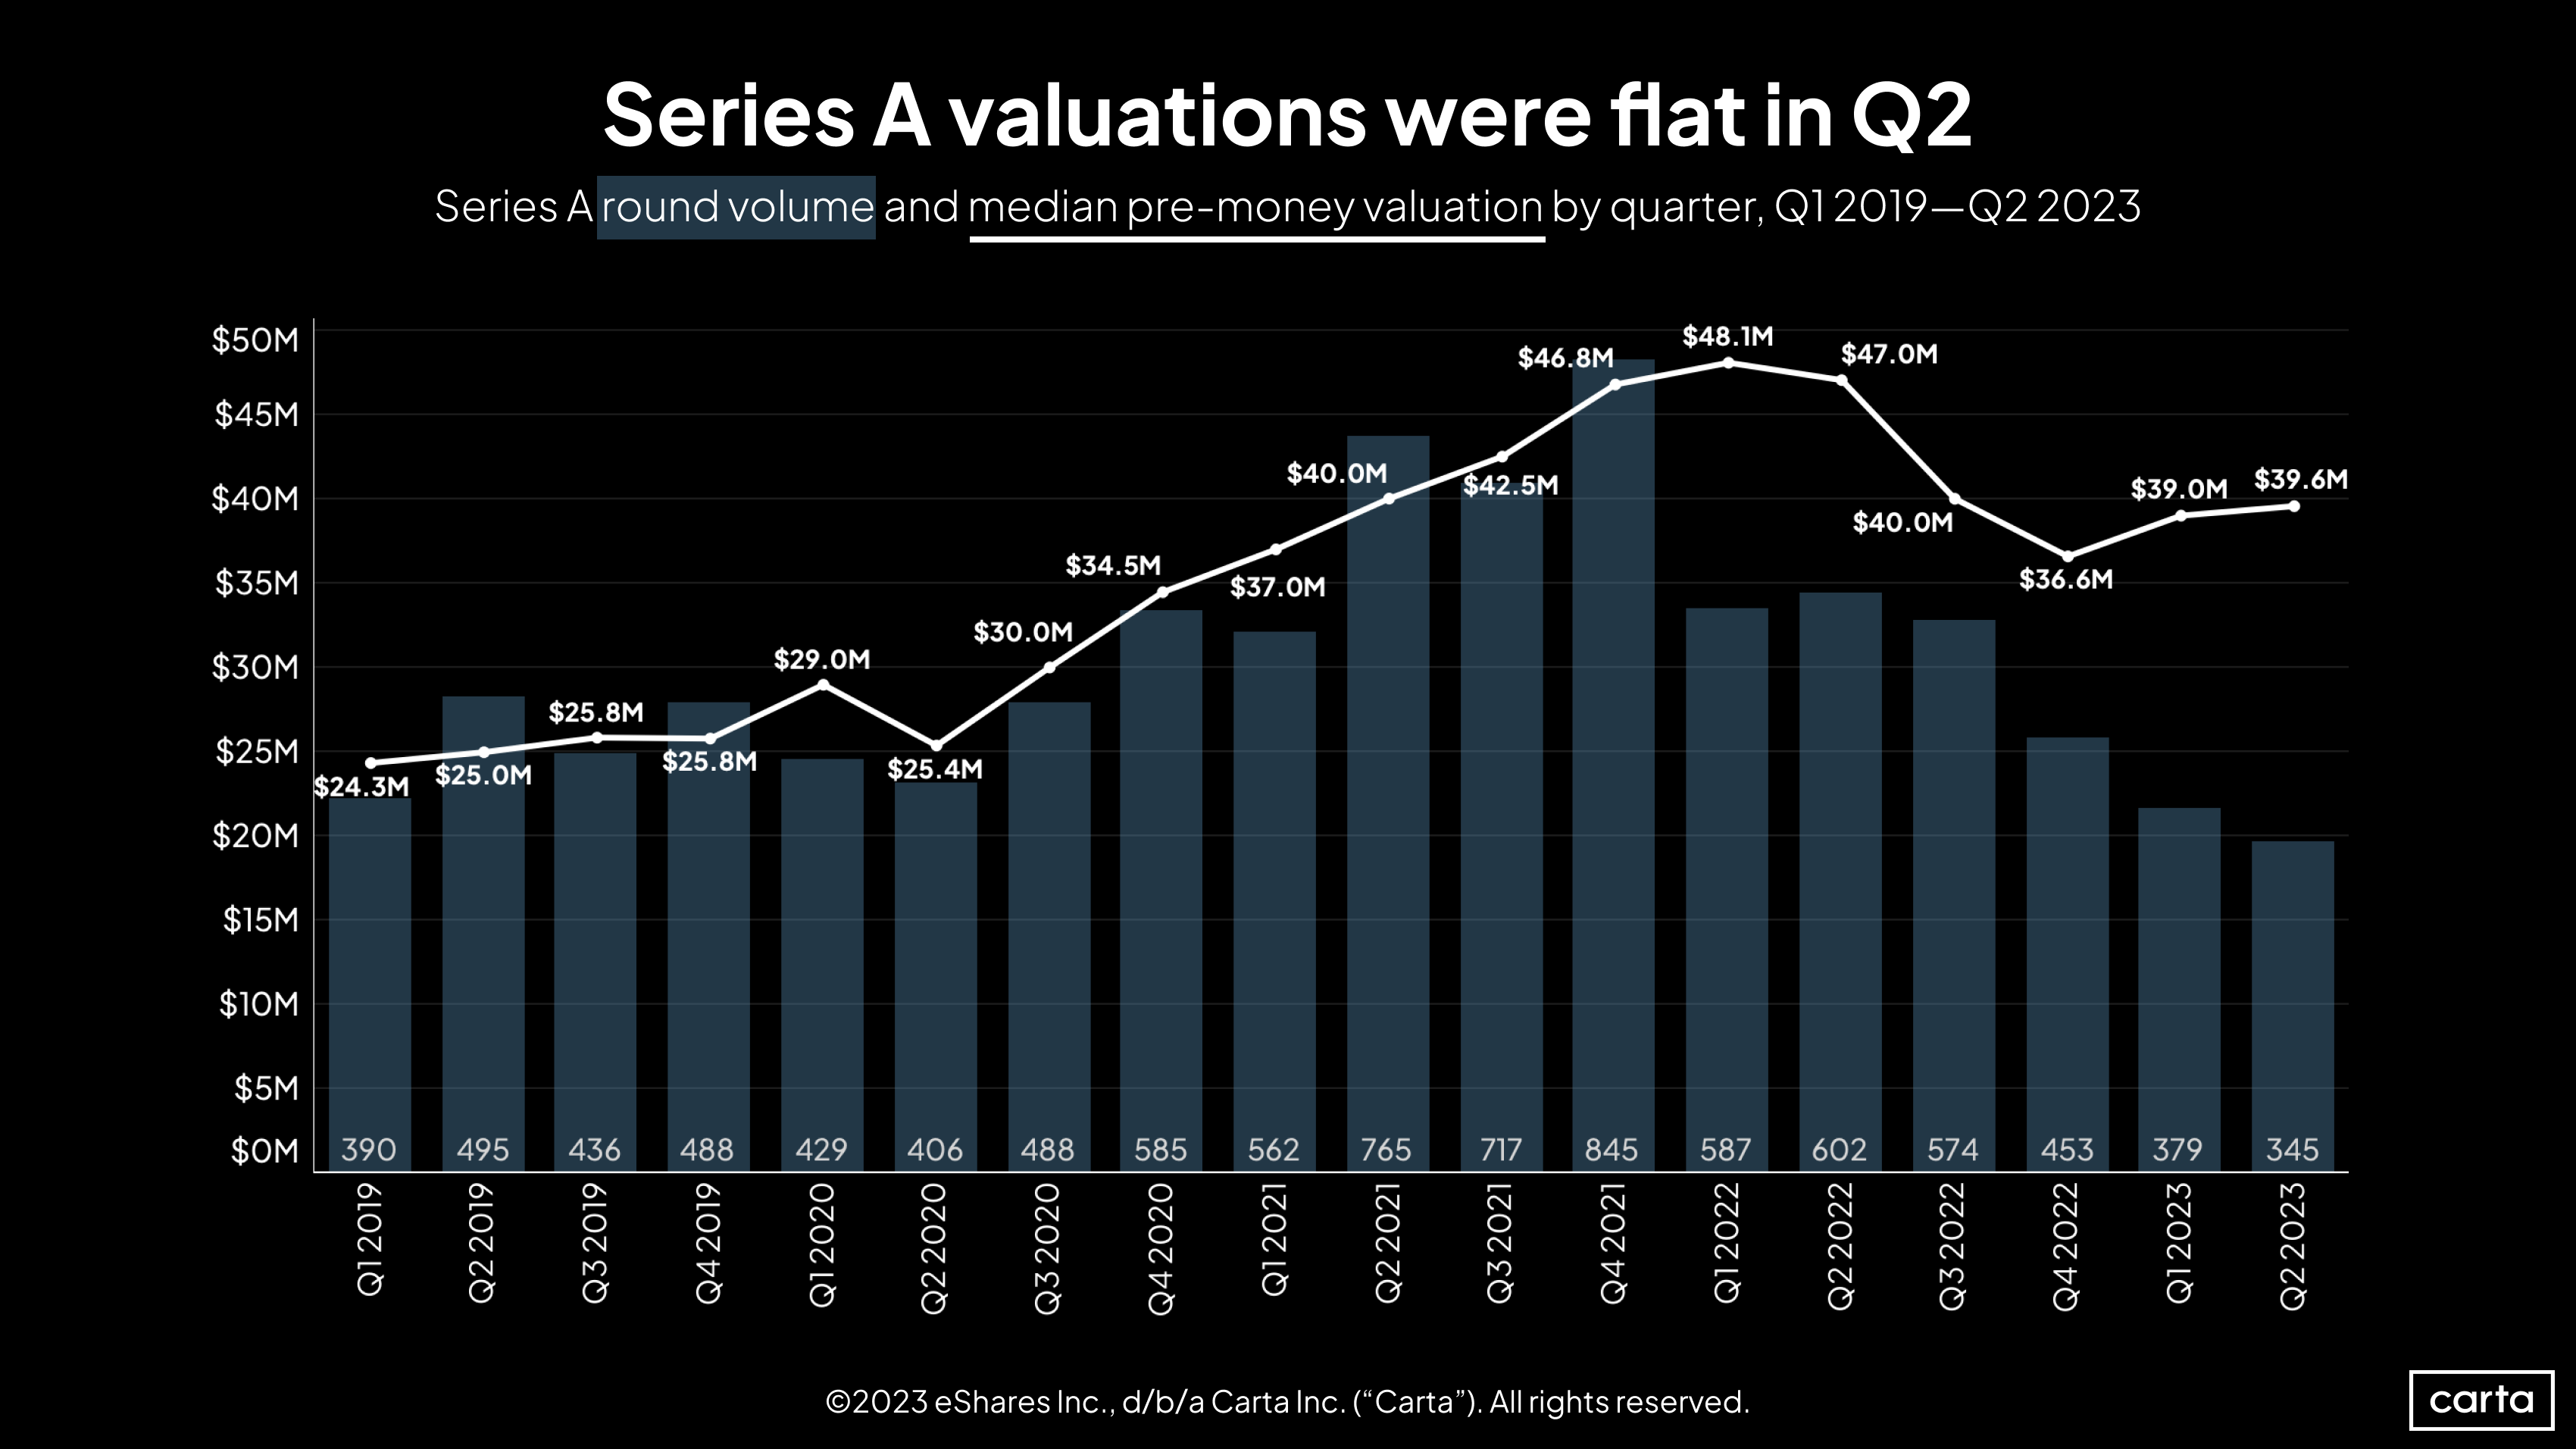 Series A round volume and median pre-money valuation by quarter, Q1 2019 - Q2 2023